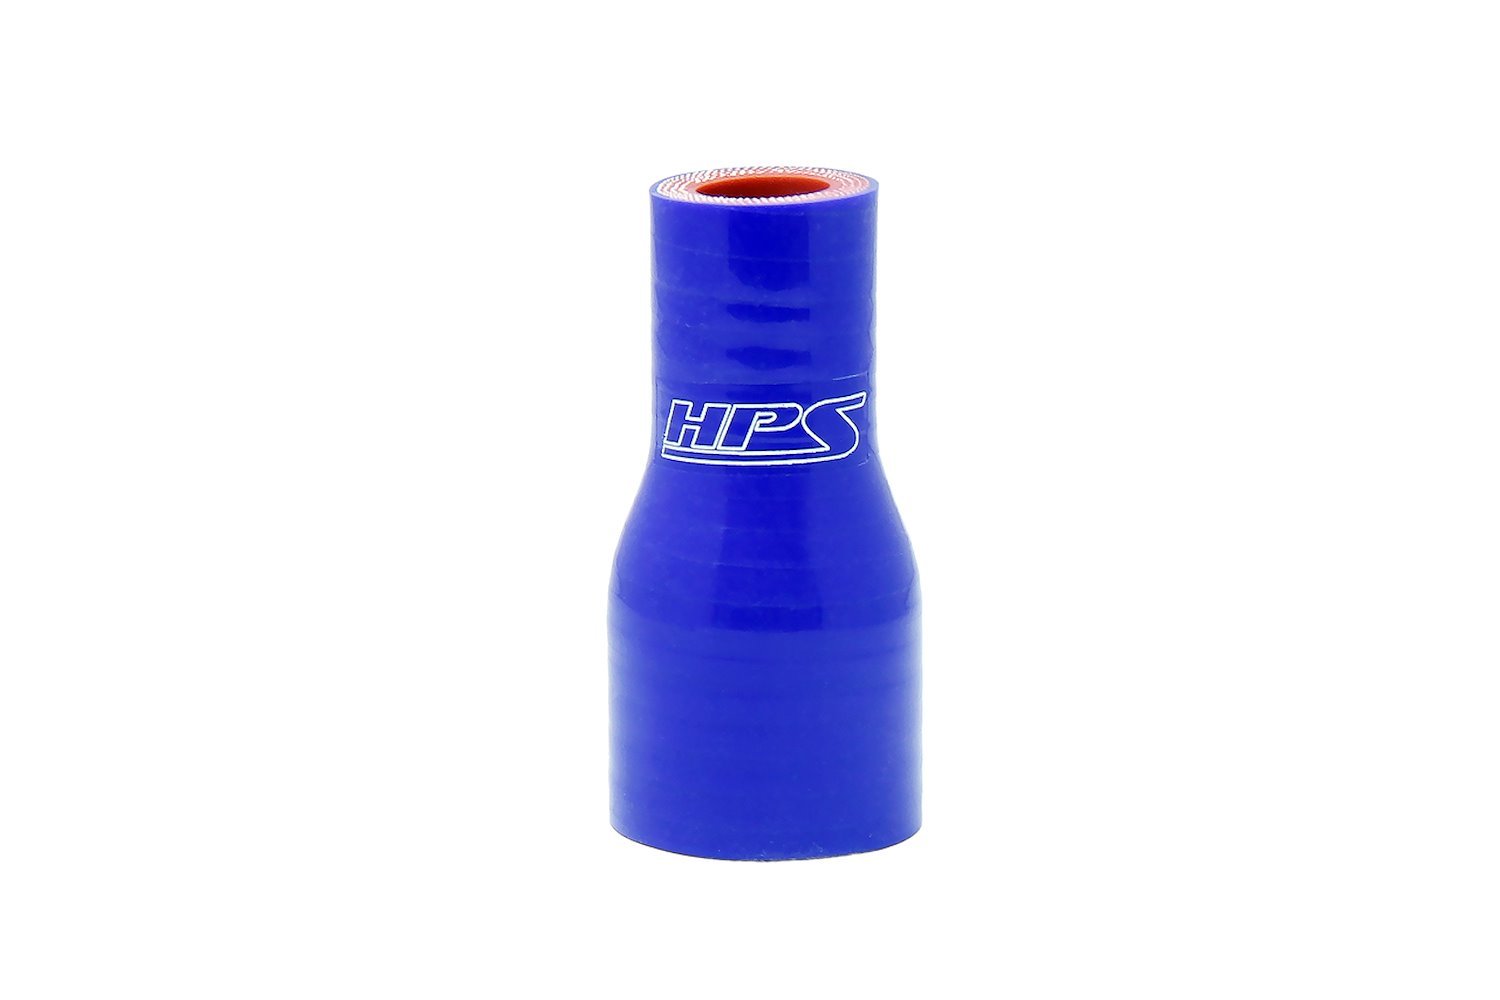 HTSR-075-100-L4-BLUE Silicone Reducer Hose, High-Temp 4-Ply Reinforced, 3/4 in. - 1 in. ID, 4 in. Long, Blue